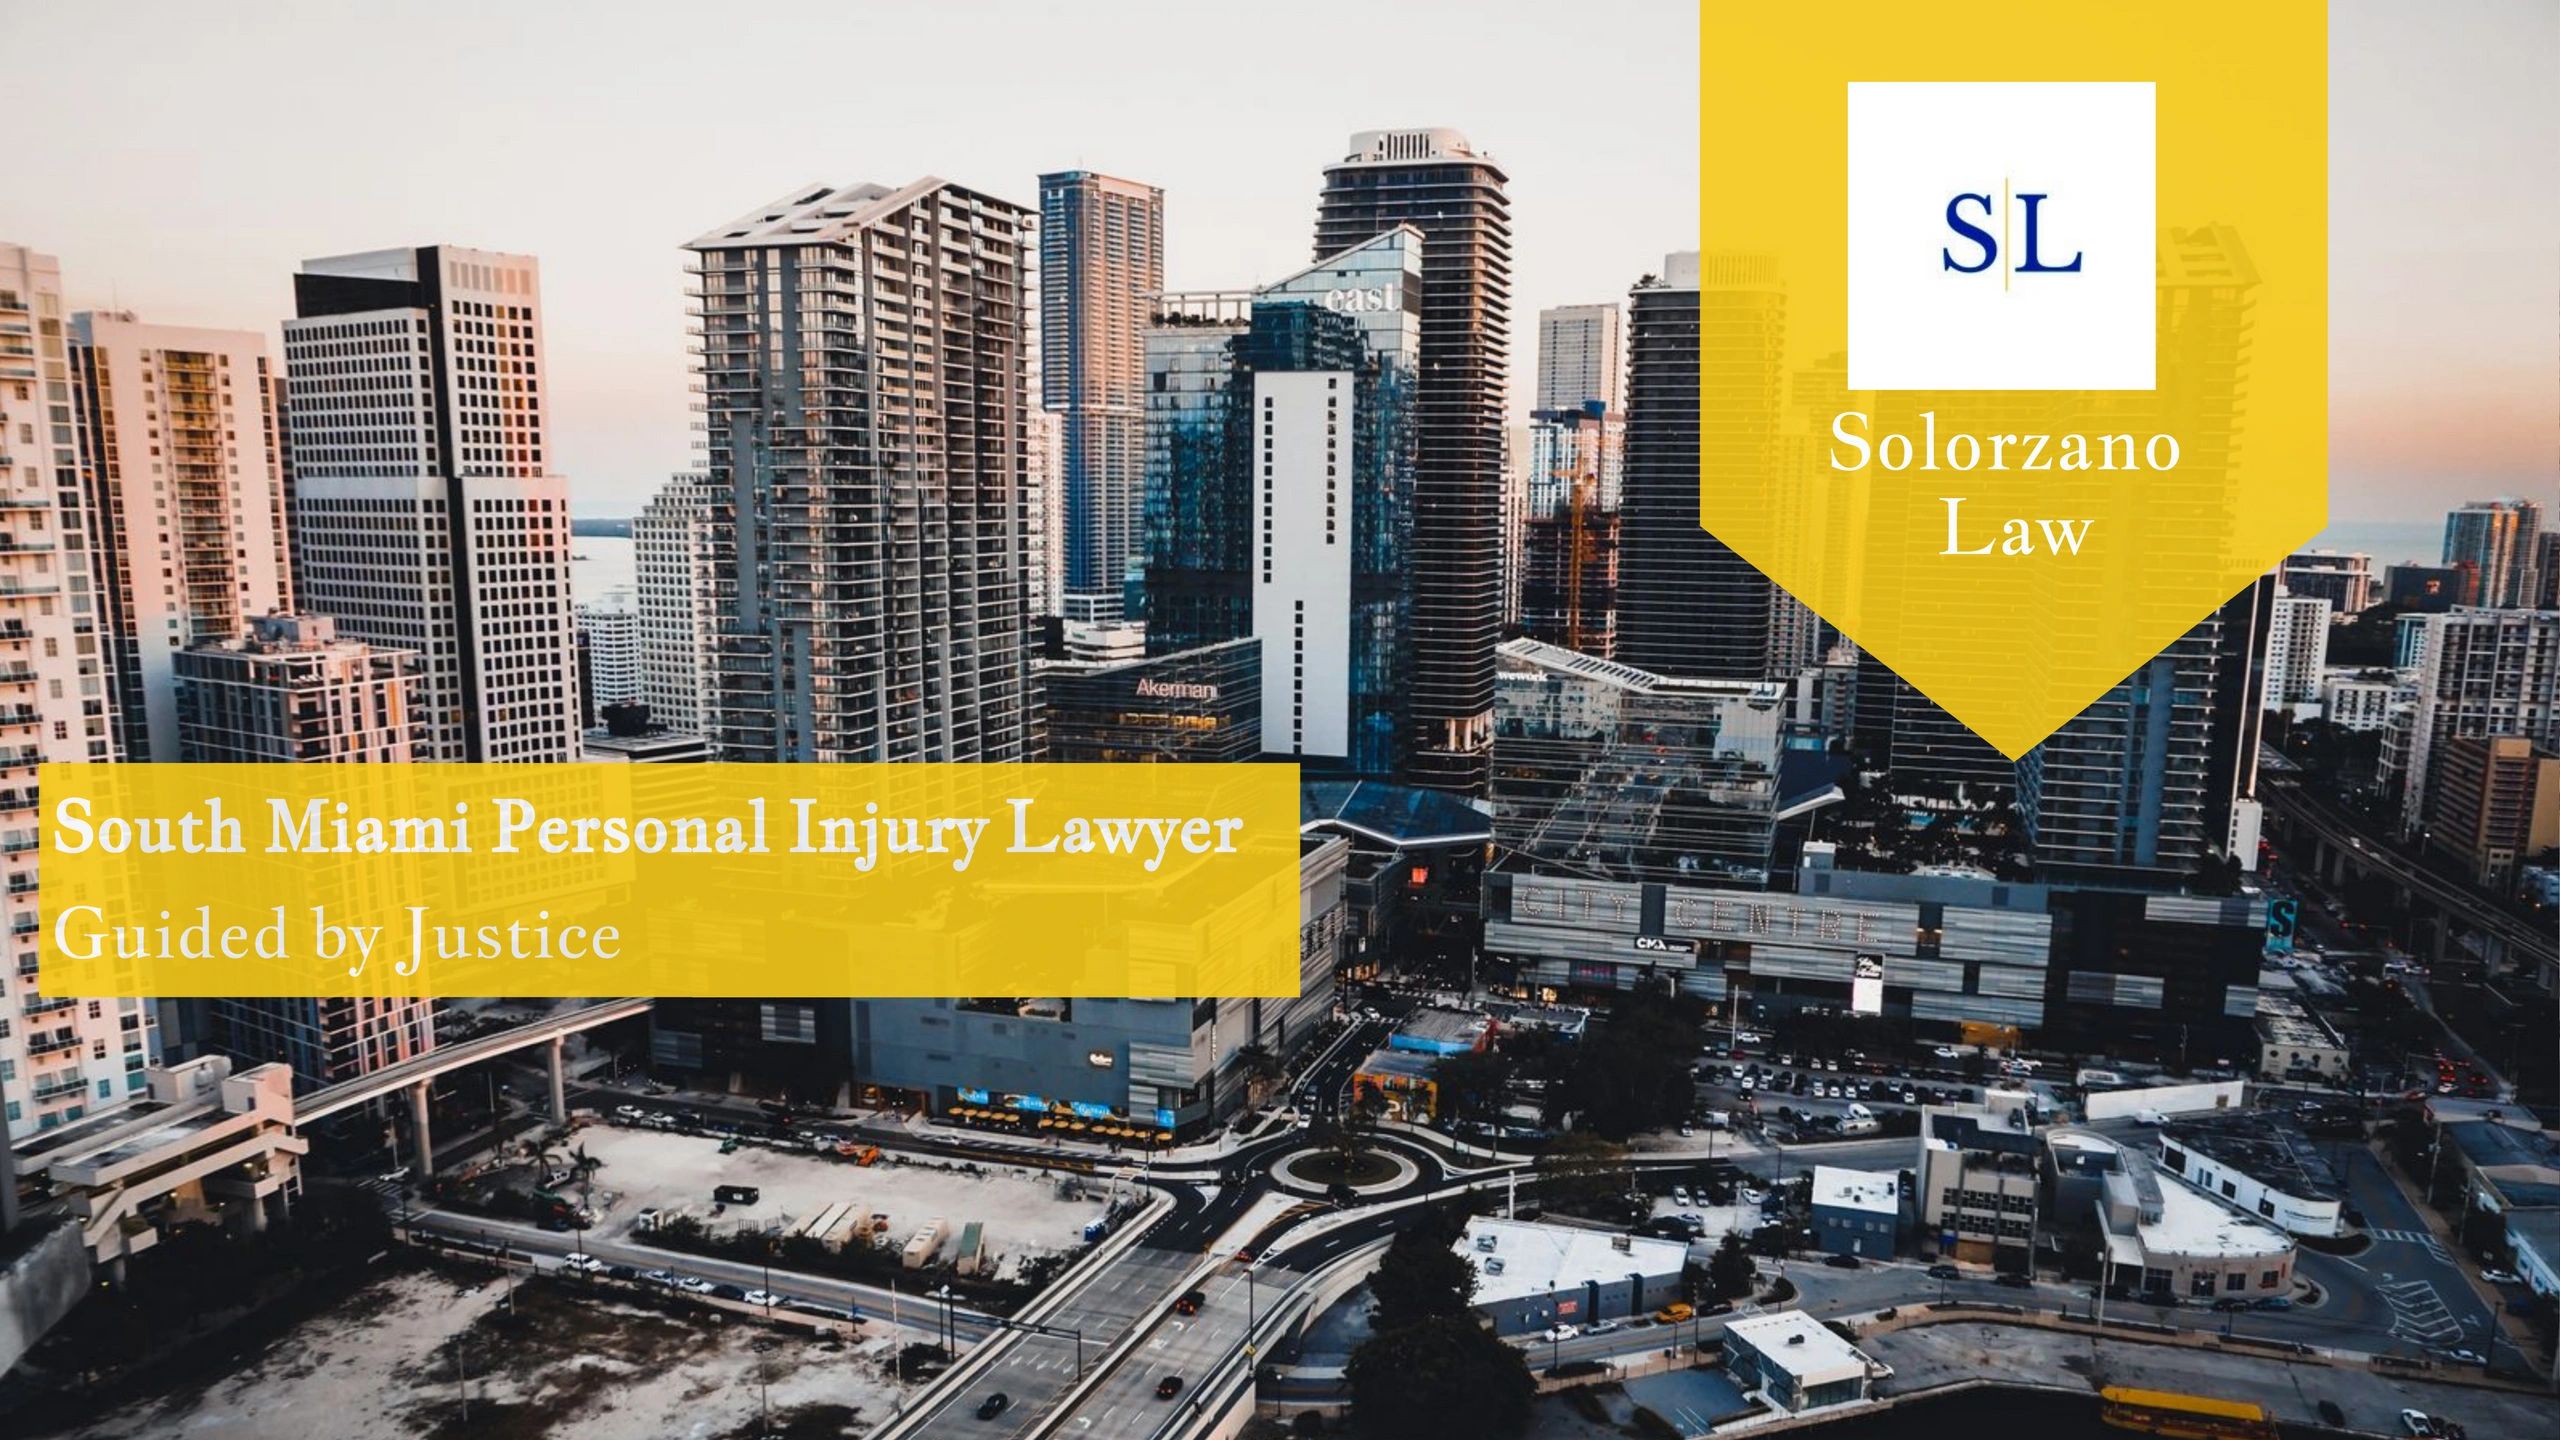 south miami car accident lawyer
south miami uber accident attorney
best lawyer in south miami